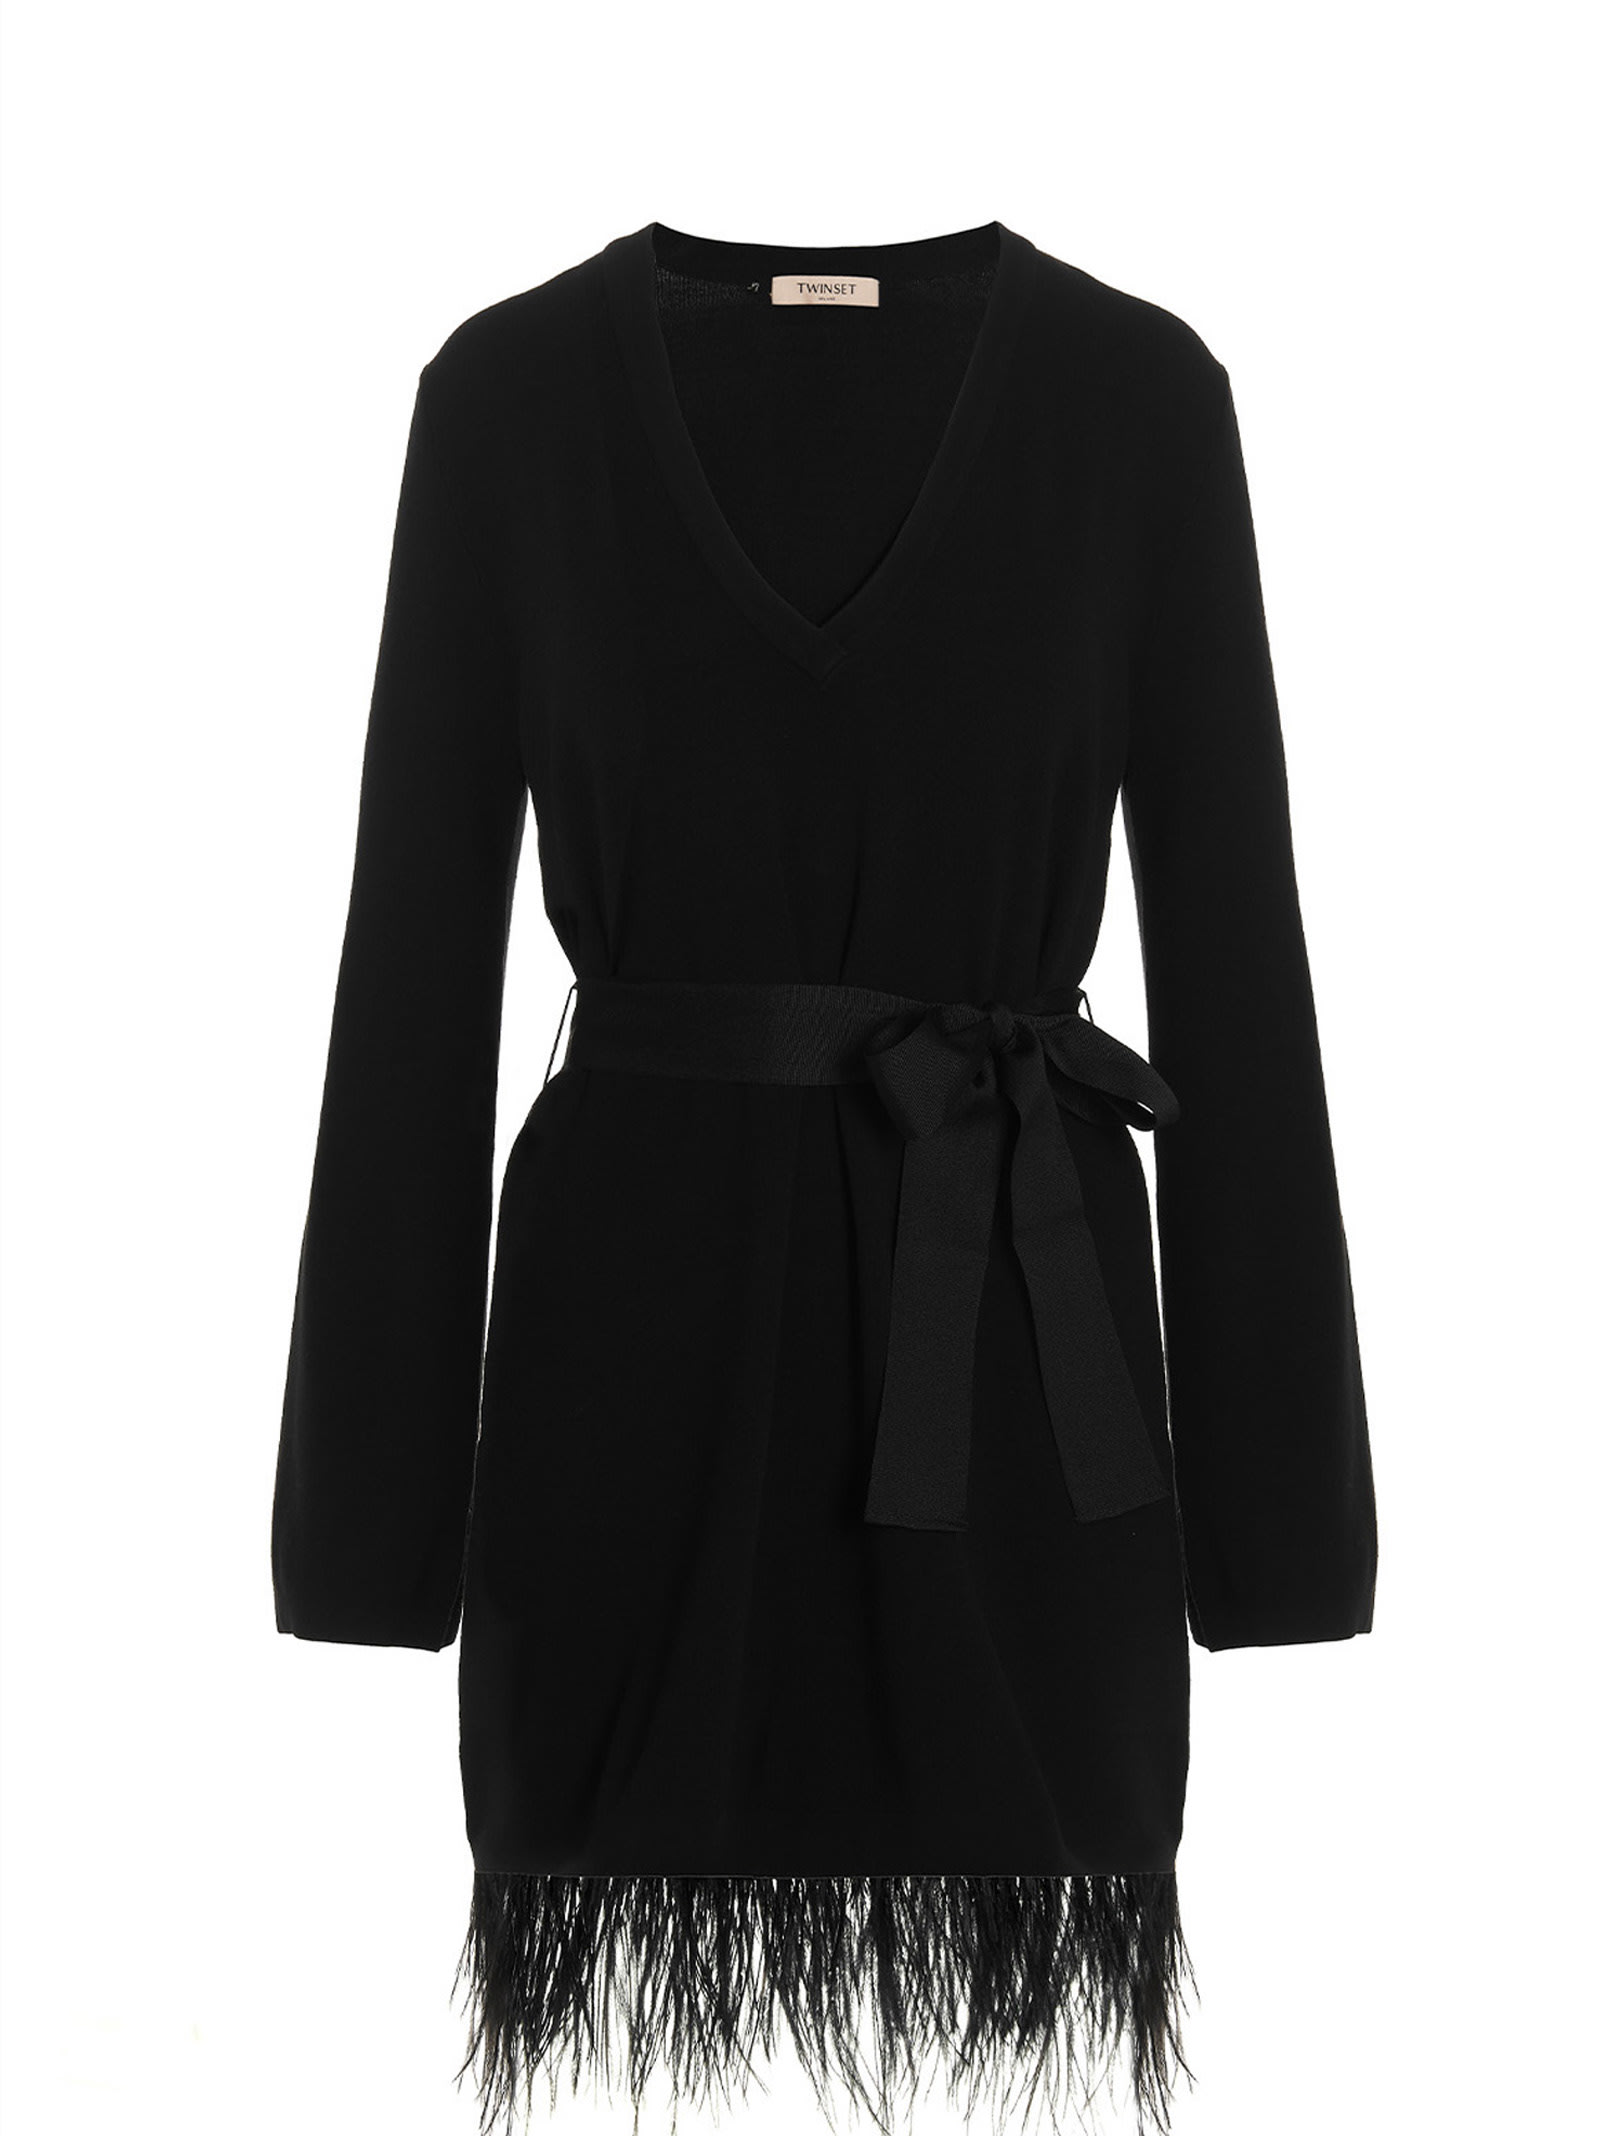 TwinSet Belted Knit Dress